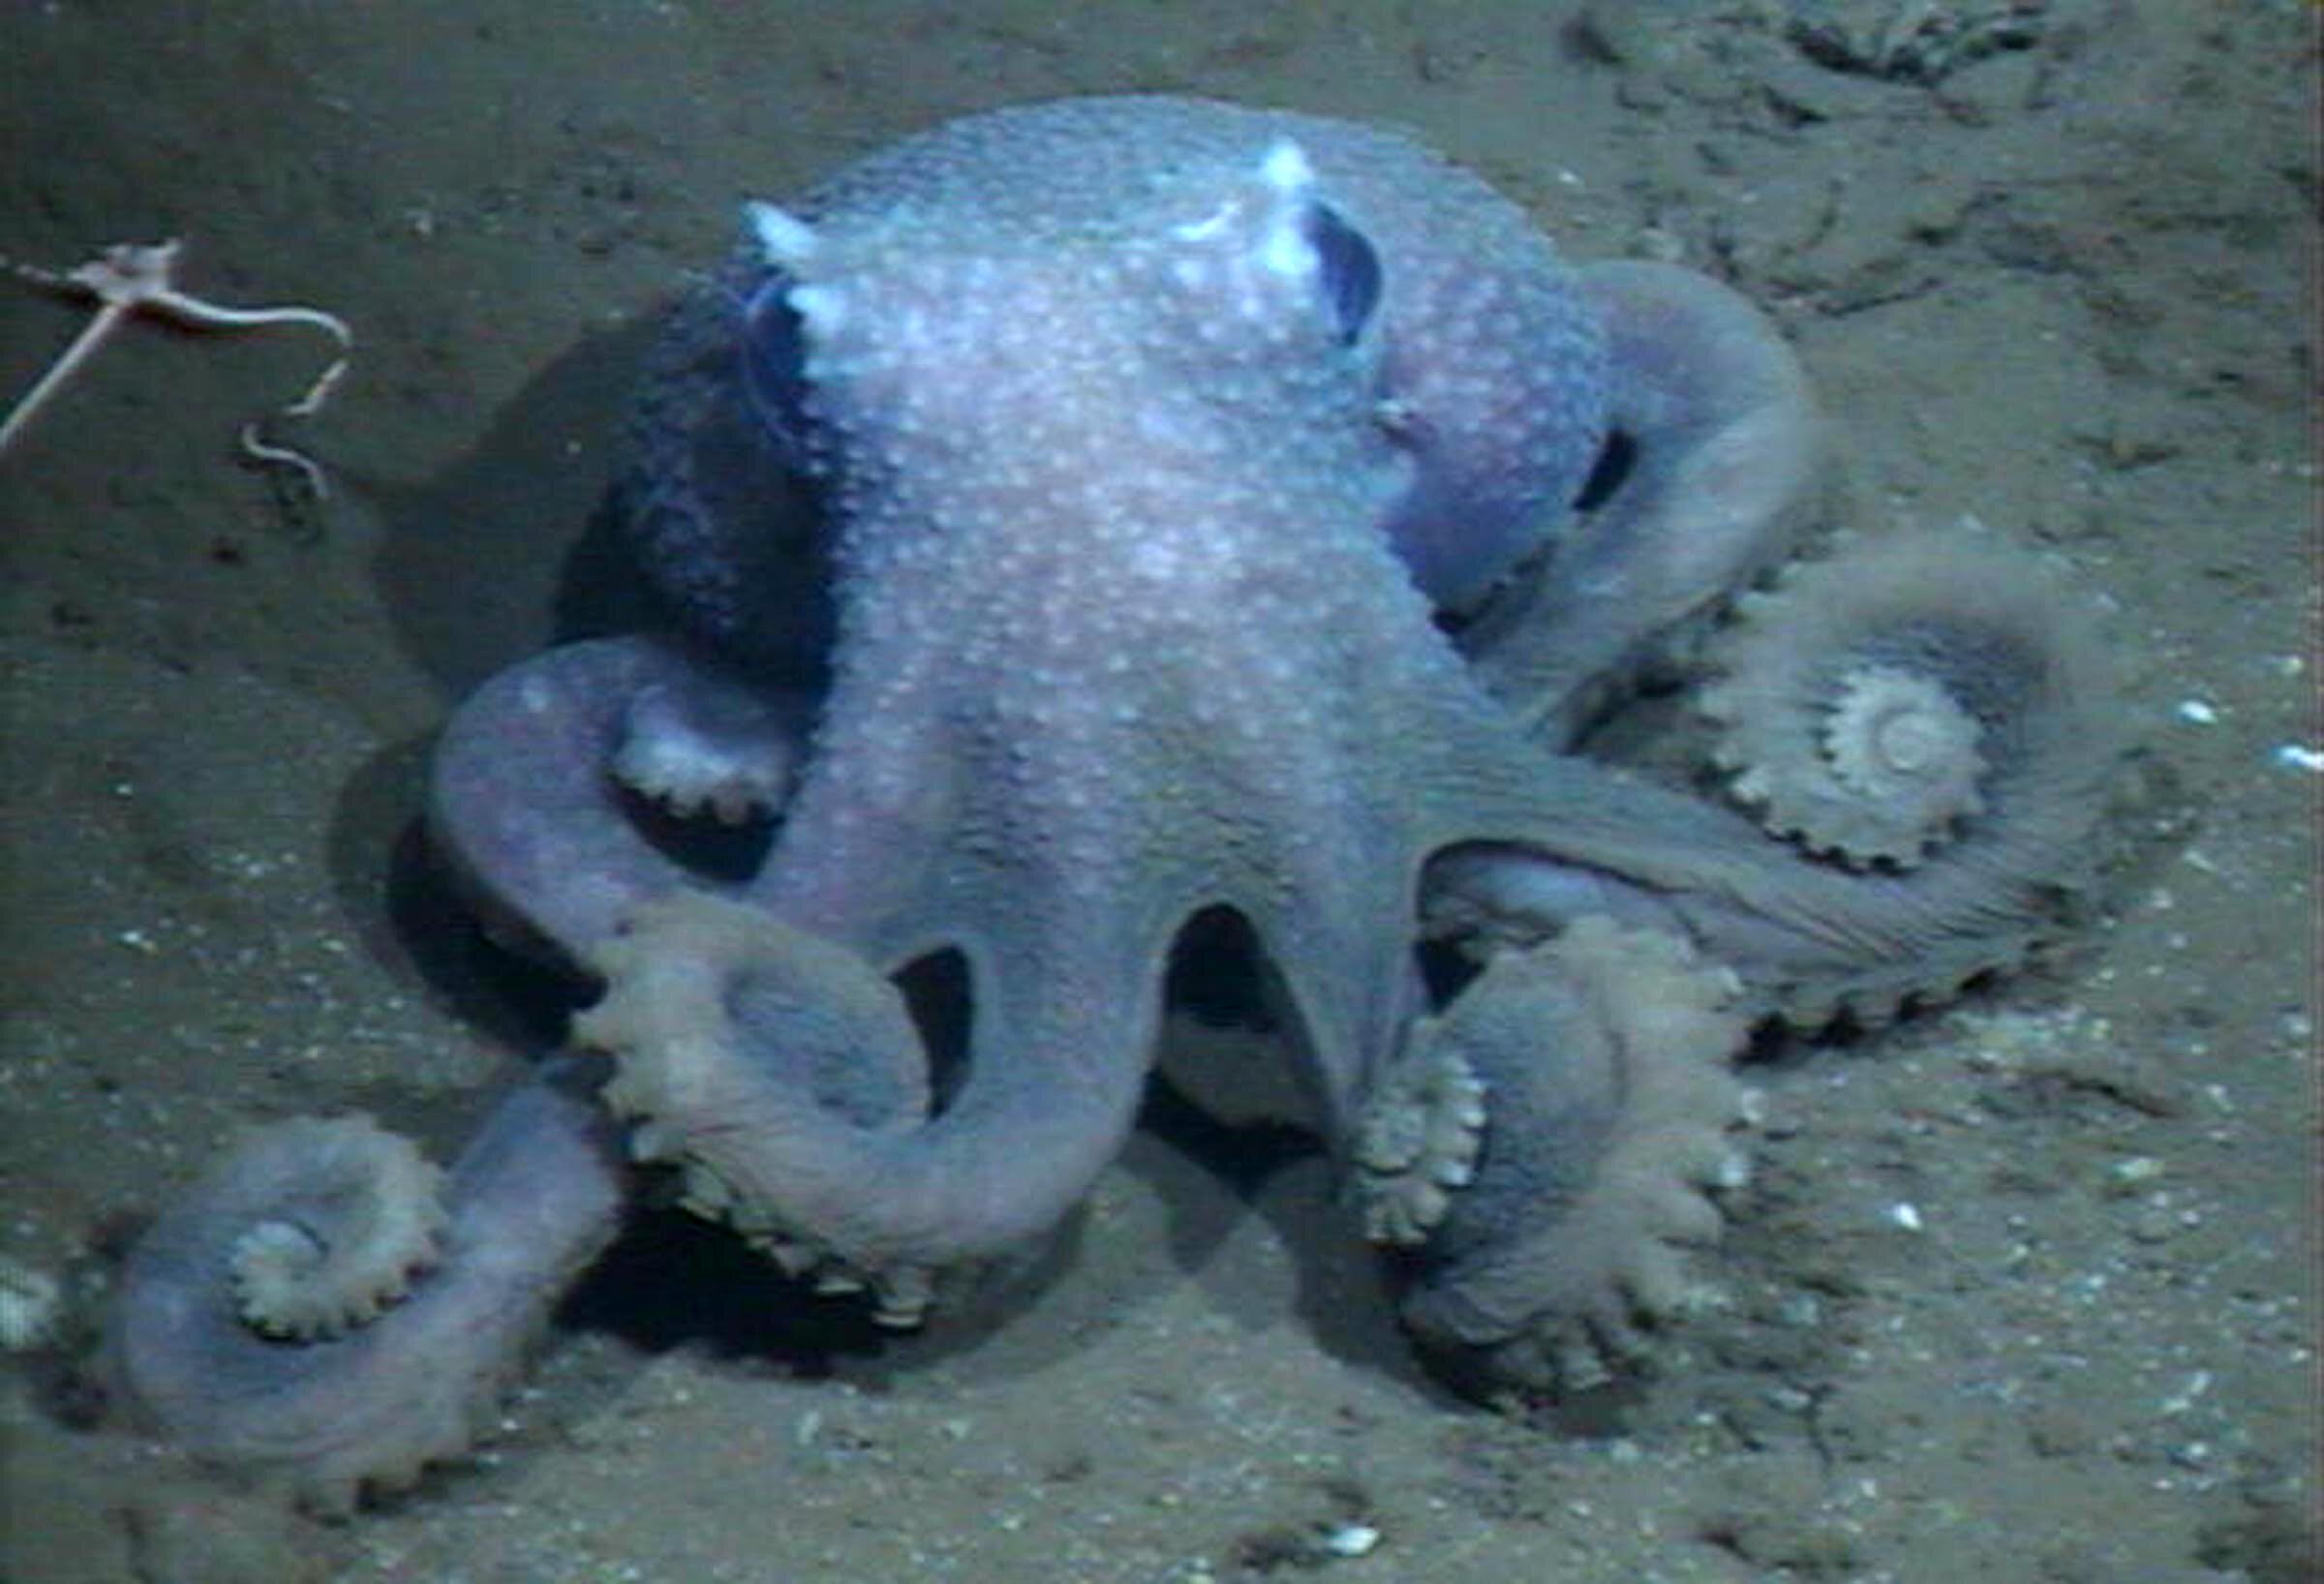 Detail Images Of An Octopus Nomer 31